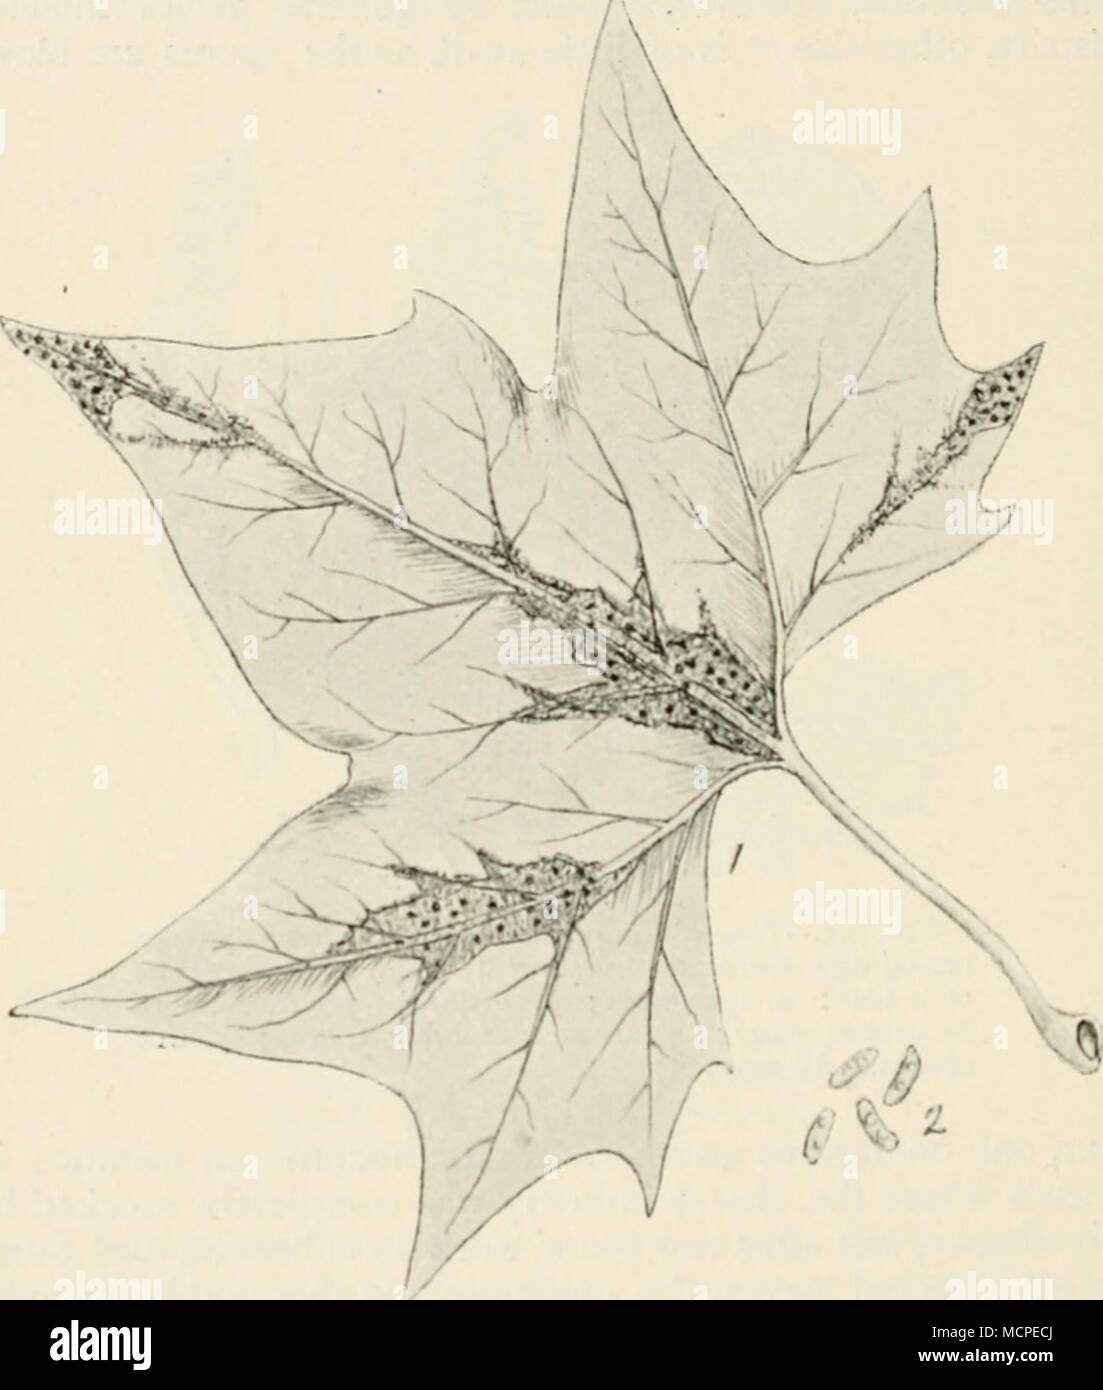 . Fig. 56.- â Gnomonia veneta. 1, a diseased plane leaf, soniowliat reduced ; 2, conidia, highly mag. along the course of the veins on the under surface of the leaf. This disease was considered to be due entirely to Gloeo- sporium tiervisequum (Sacc). Klebahn, however, has recently worked out the life-history of the fungus, and shows that the Gloeosporiian is but a conidial form oi an ascigerous fungus Stock Photo